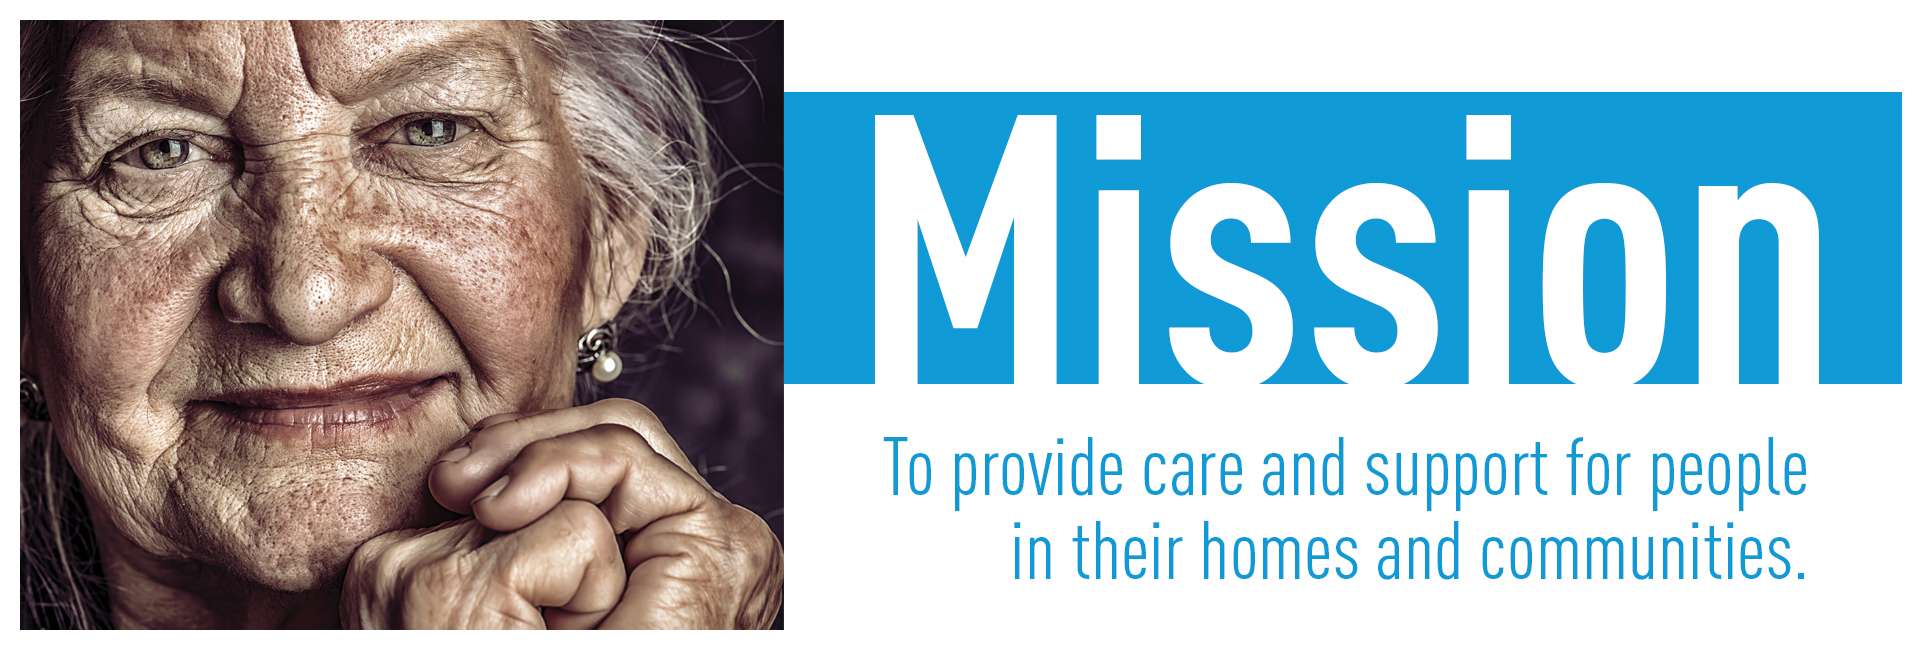 Mission: To provide care and support for people in their homes and communities.